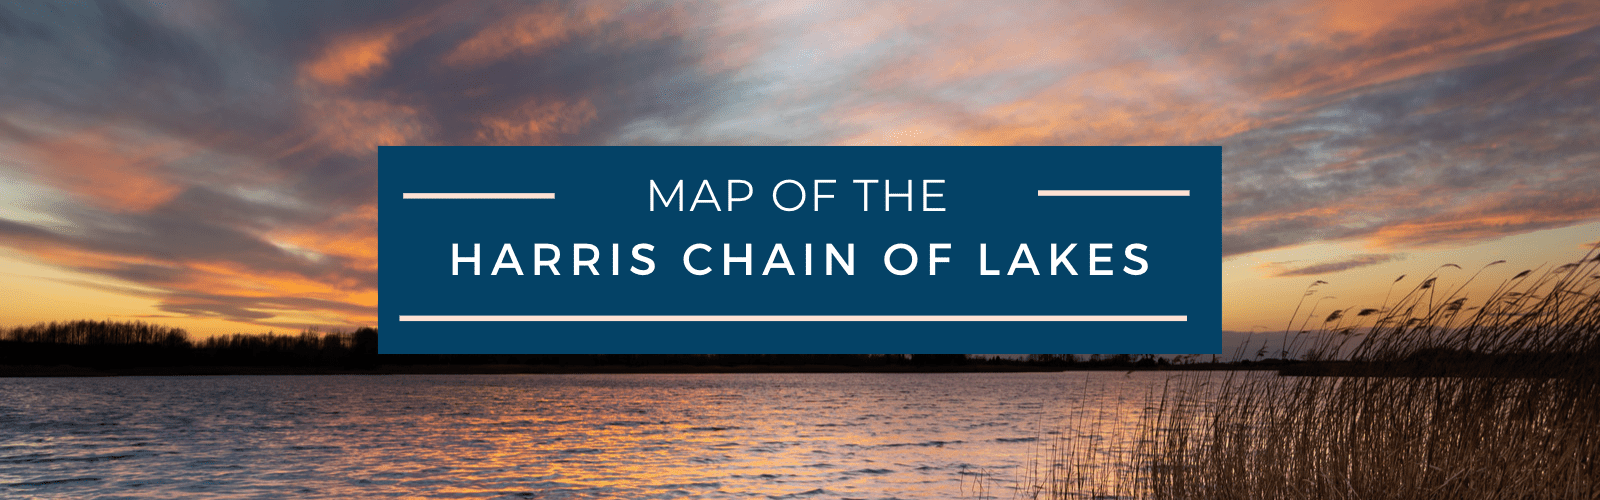 Map of Lake County Harris Chain of Lakes